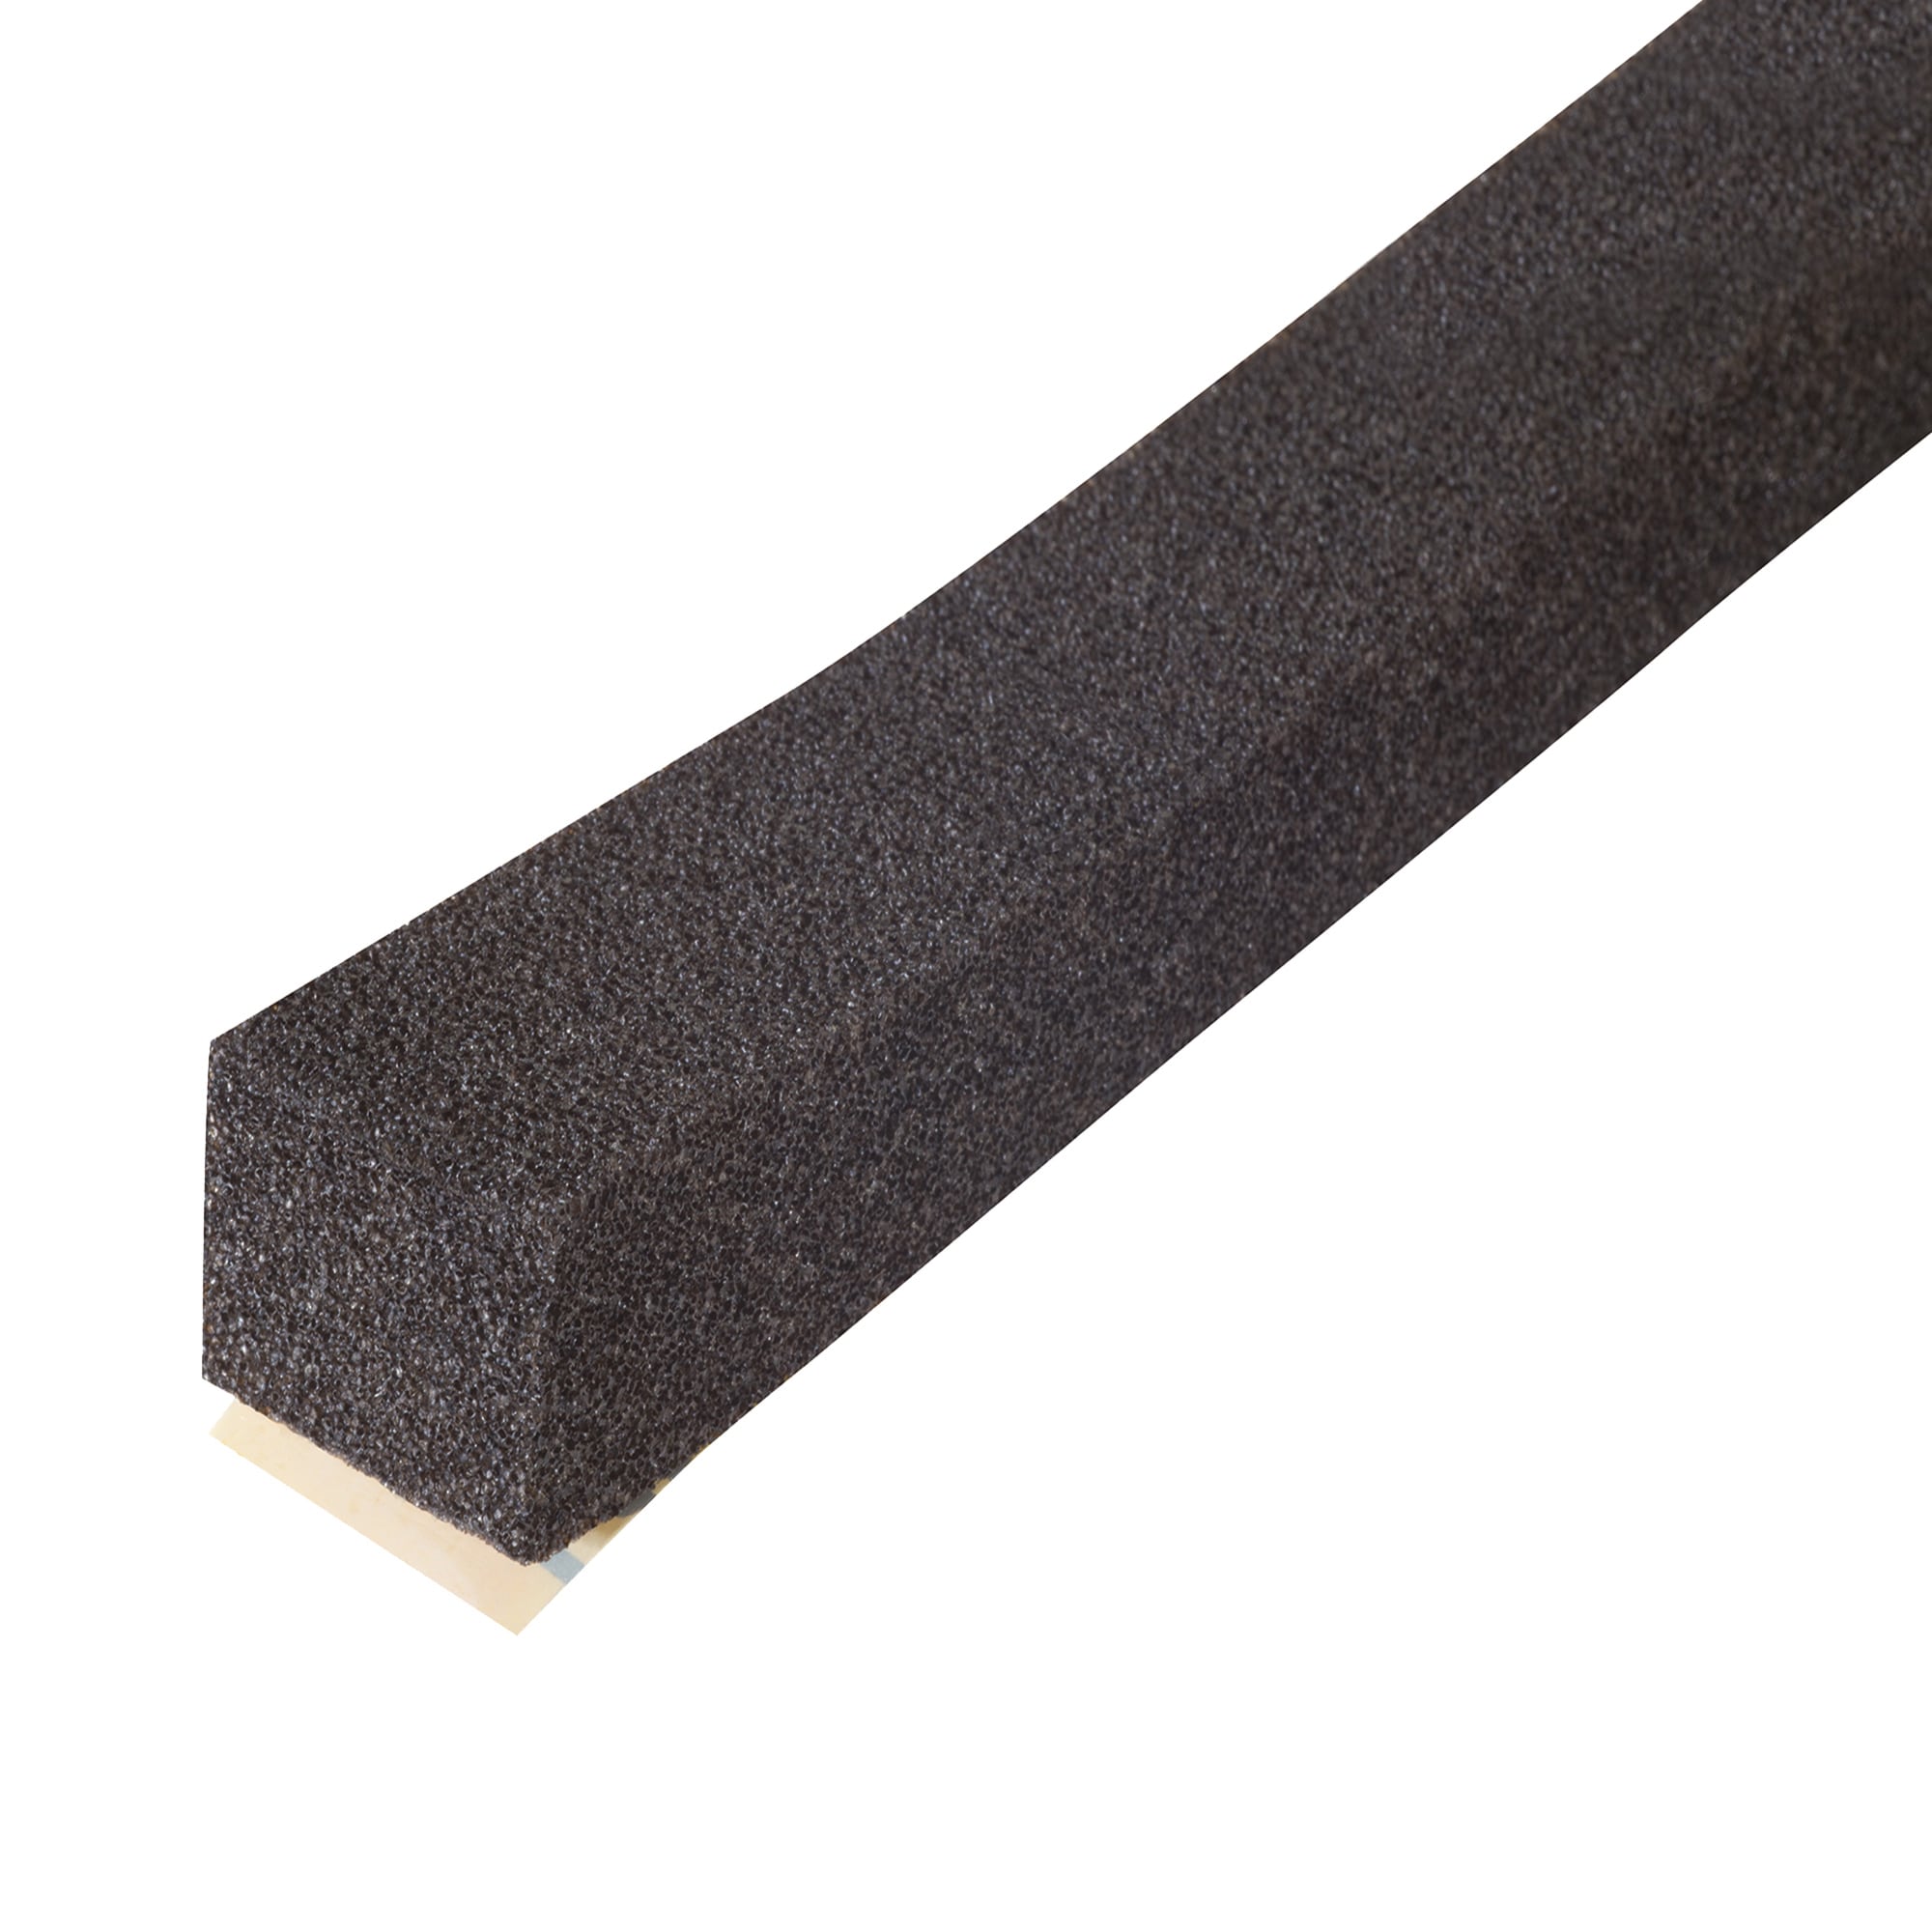 1/32 Thick Gray Fire-Resistant Silicone Foam Strip Adhesive Back 1/2 W x  10 Ft